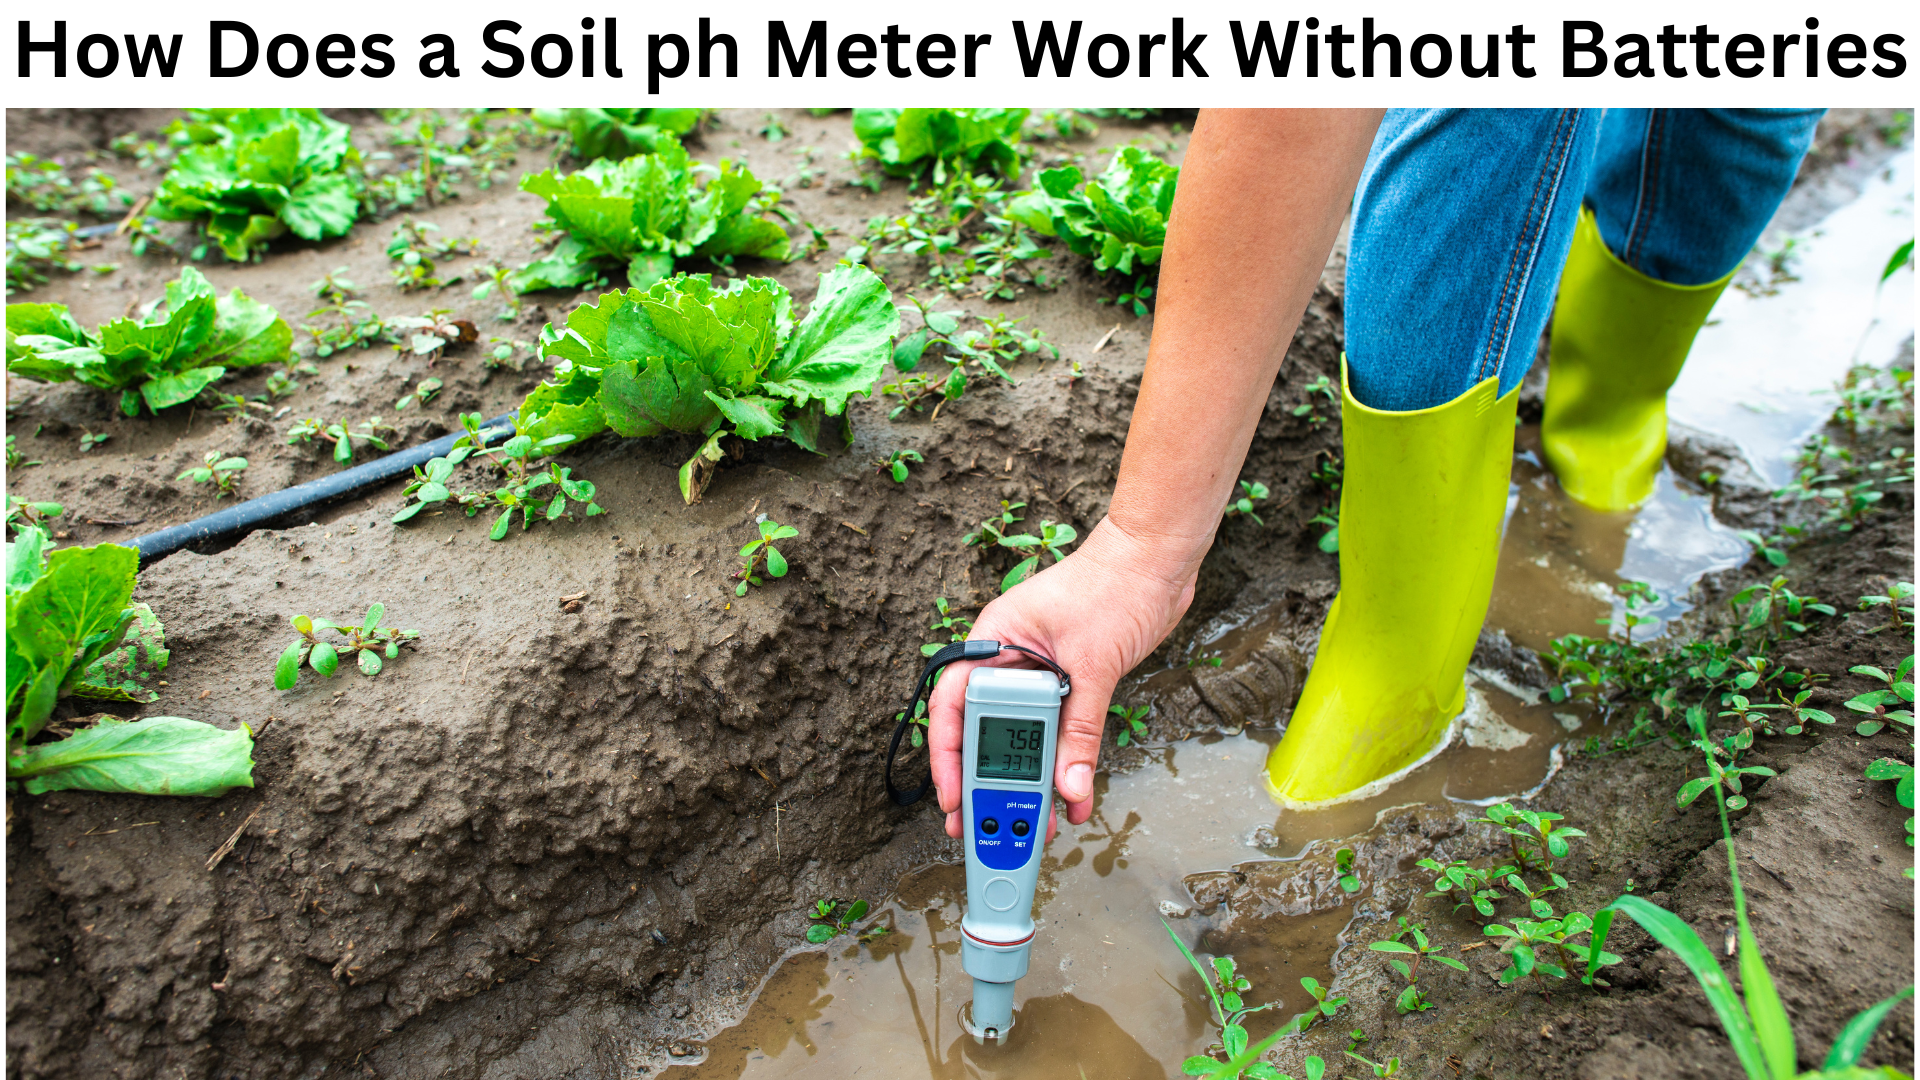 How Does a Soil ph Meter Work Without Batteries